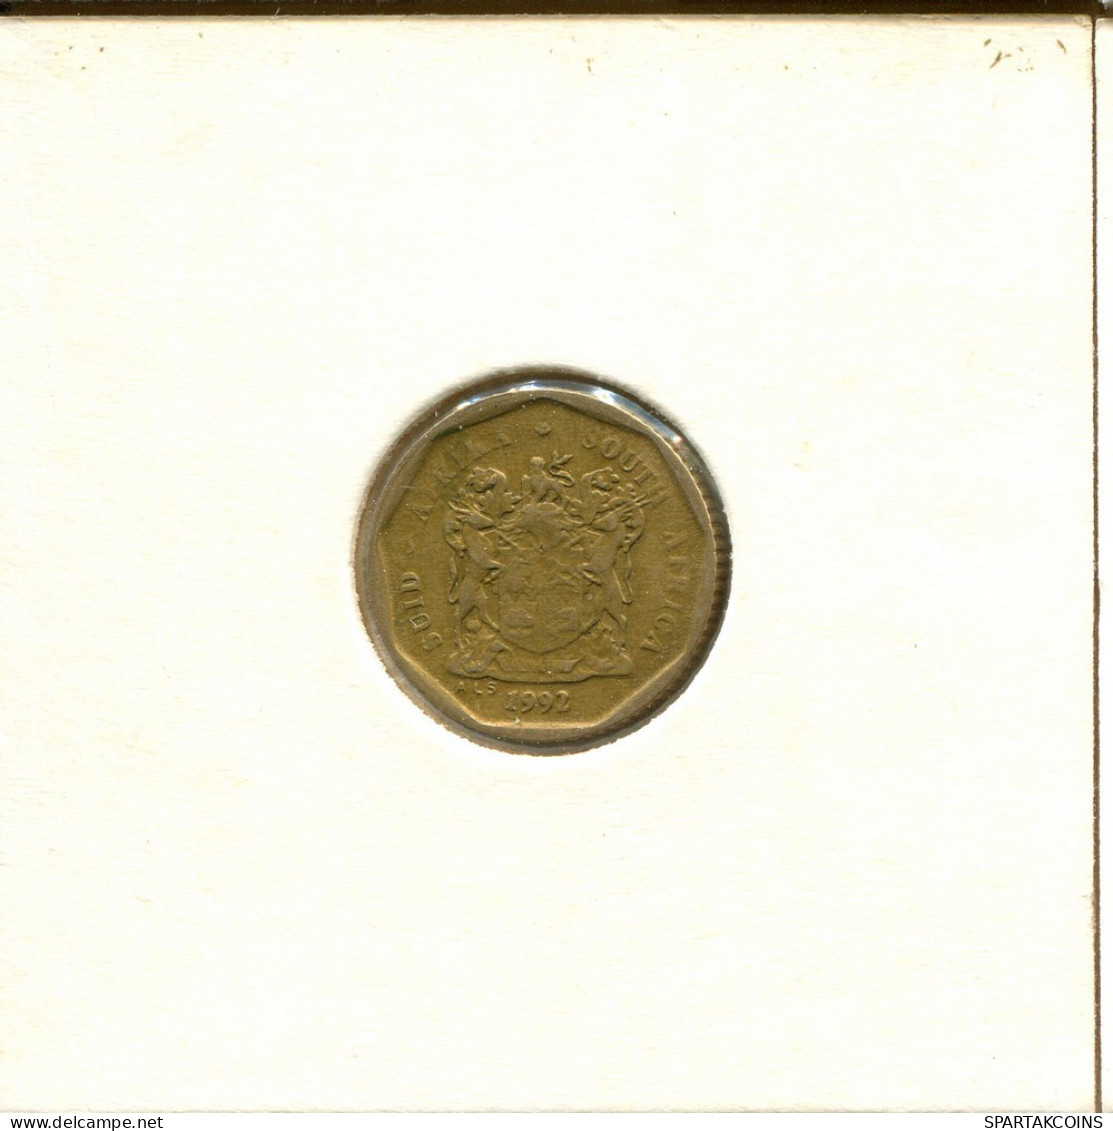 10 CENTS 1992 SUDAFRICA SOUTH AFRICA Moneda #AT138.E.A - Zuid-Afrika